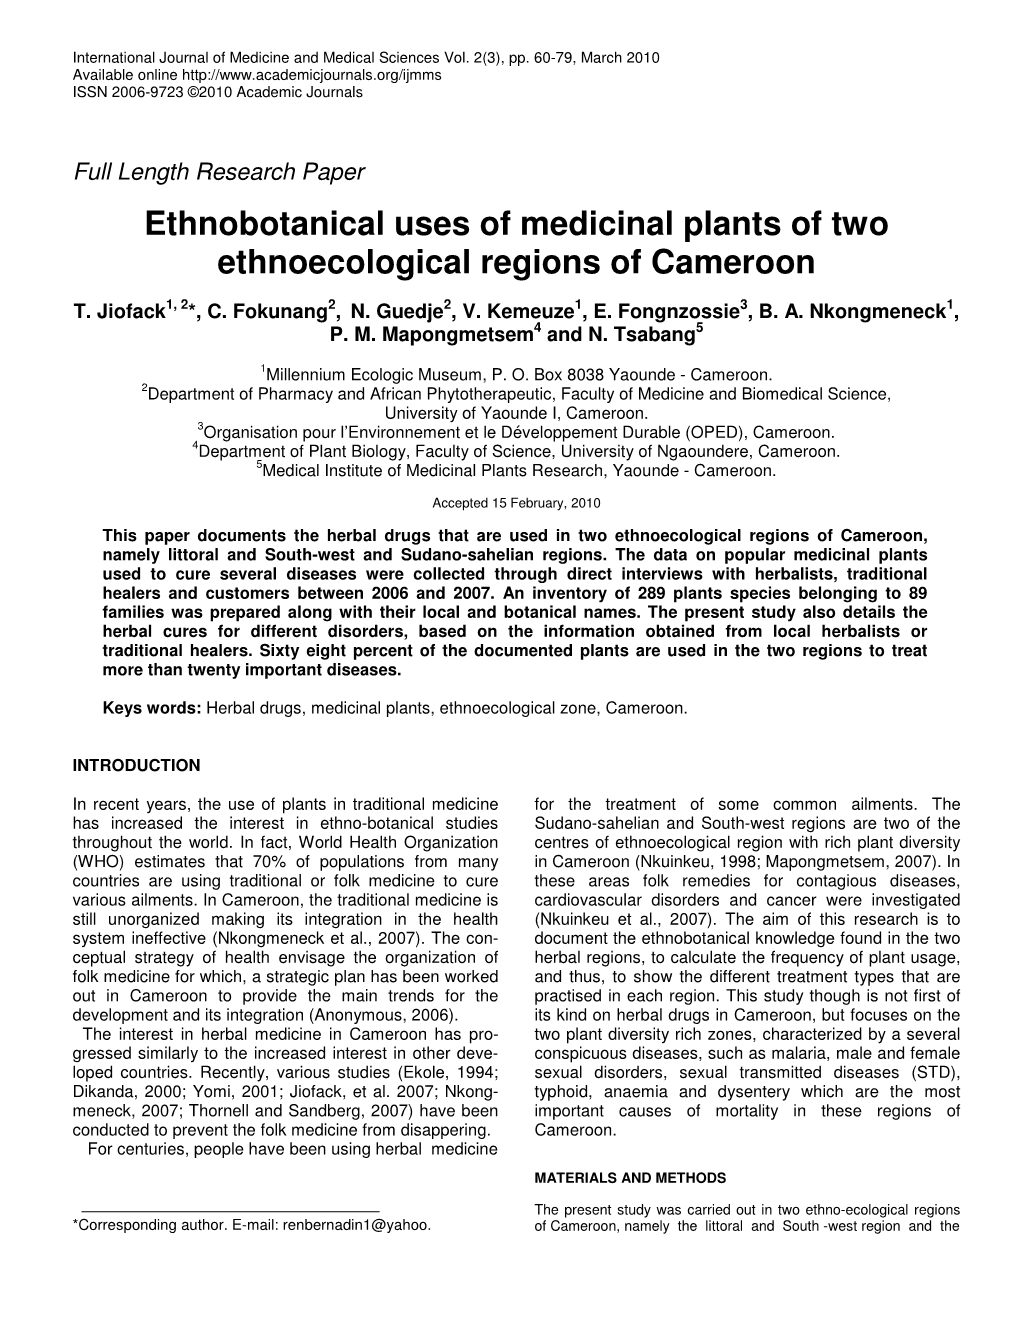 Ethnobotanical Uses of Medicinal Plants of Two Ethnoecological Regions of Cameroon